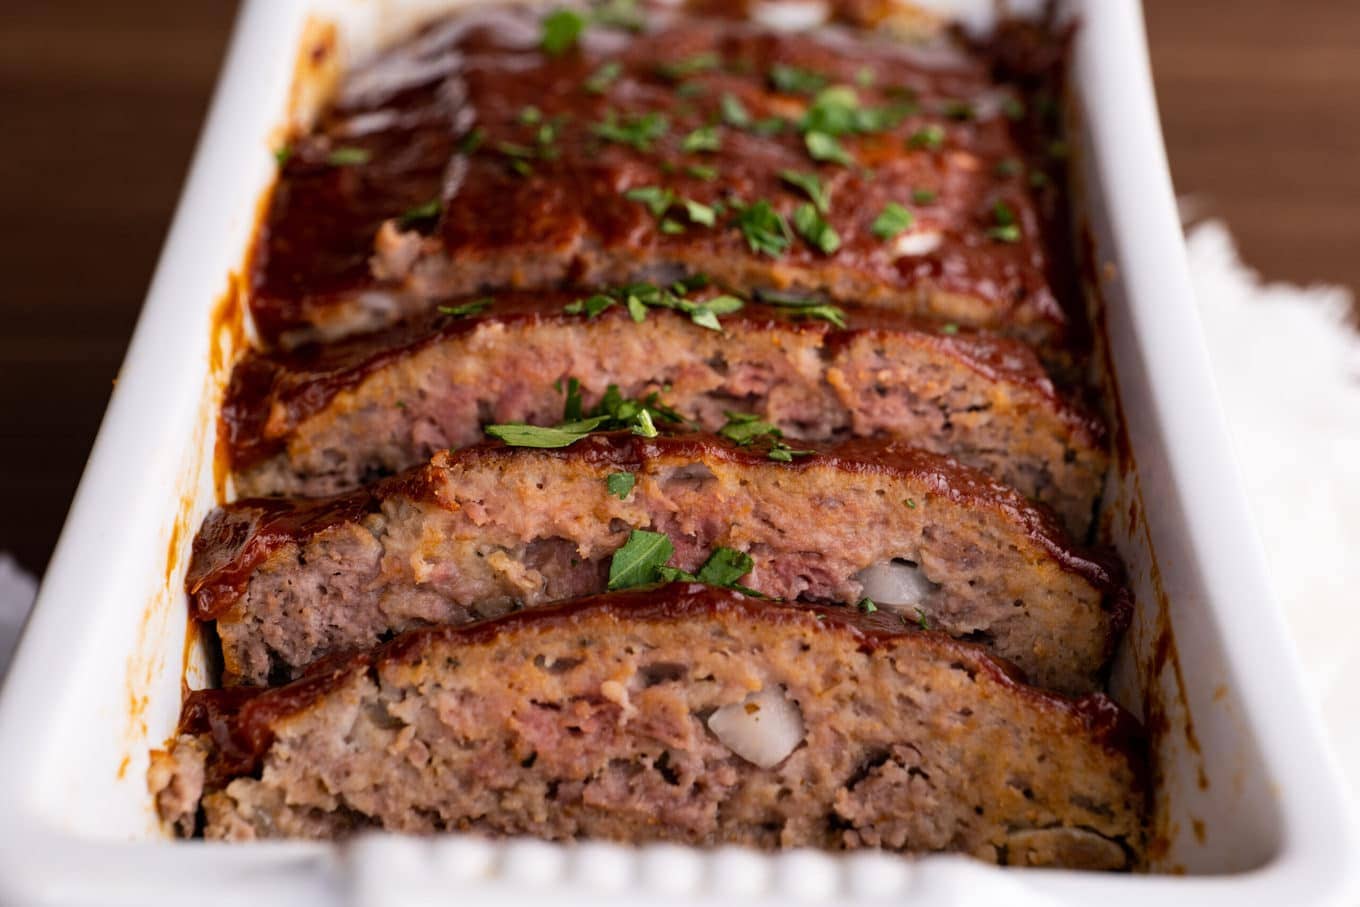 Delectable Homemade Beef Meatloaf Recipe